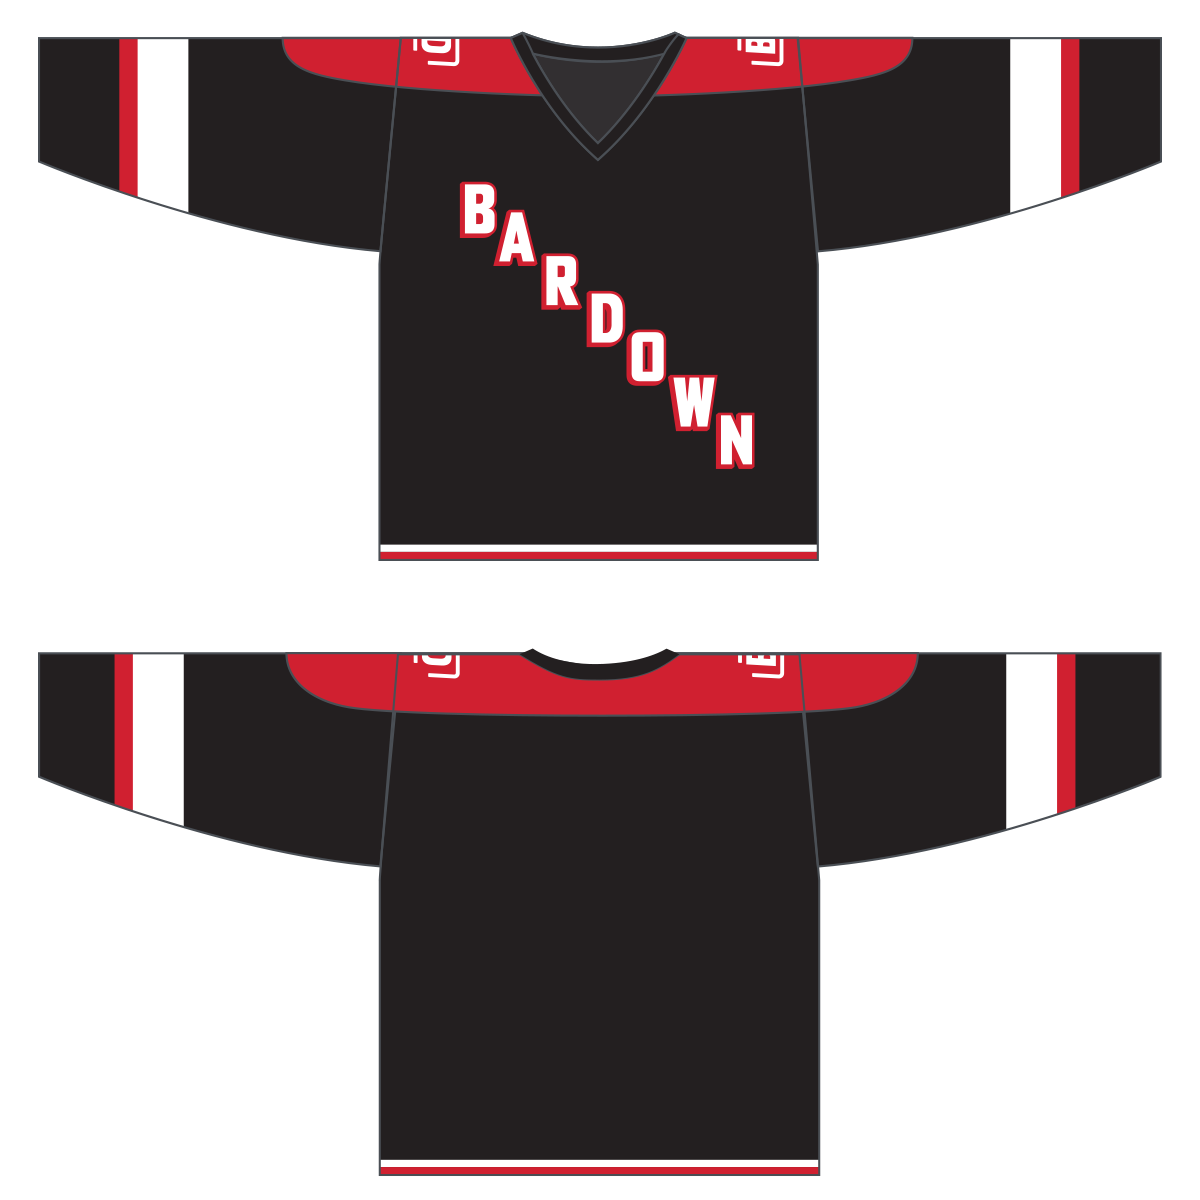 CHEL Jerseys  NHL Video Game Jerseys to Real Life